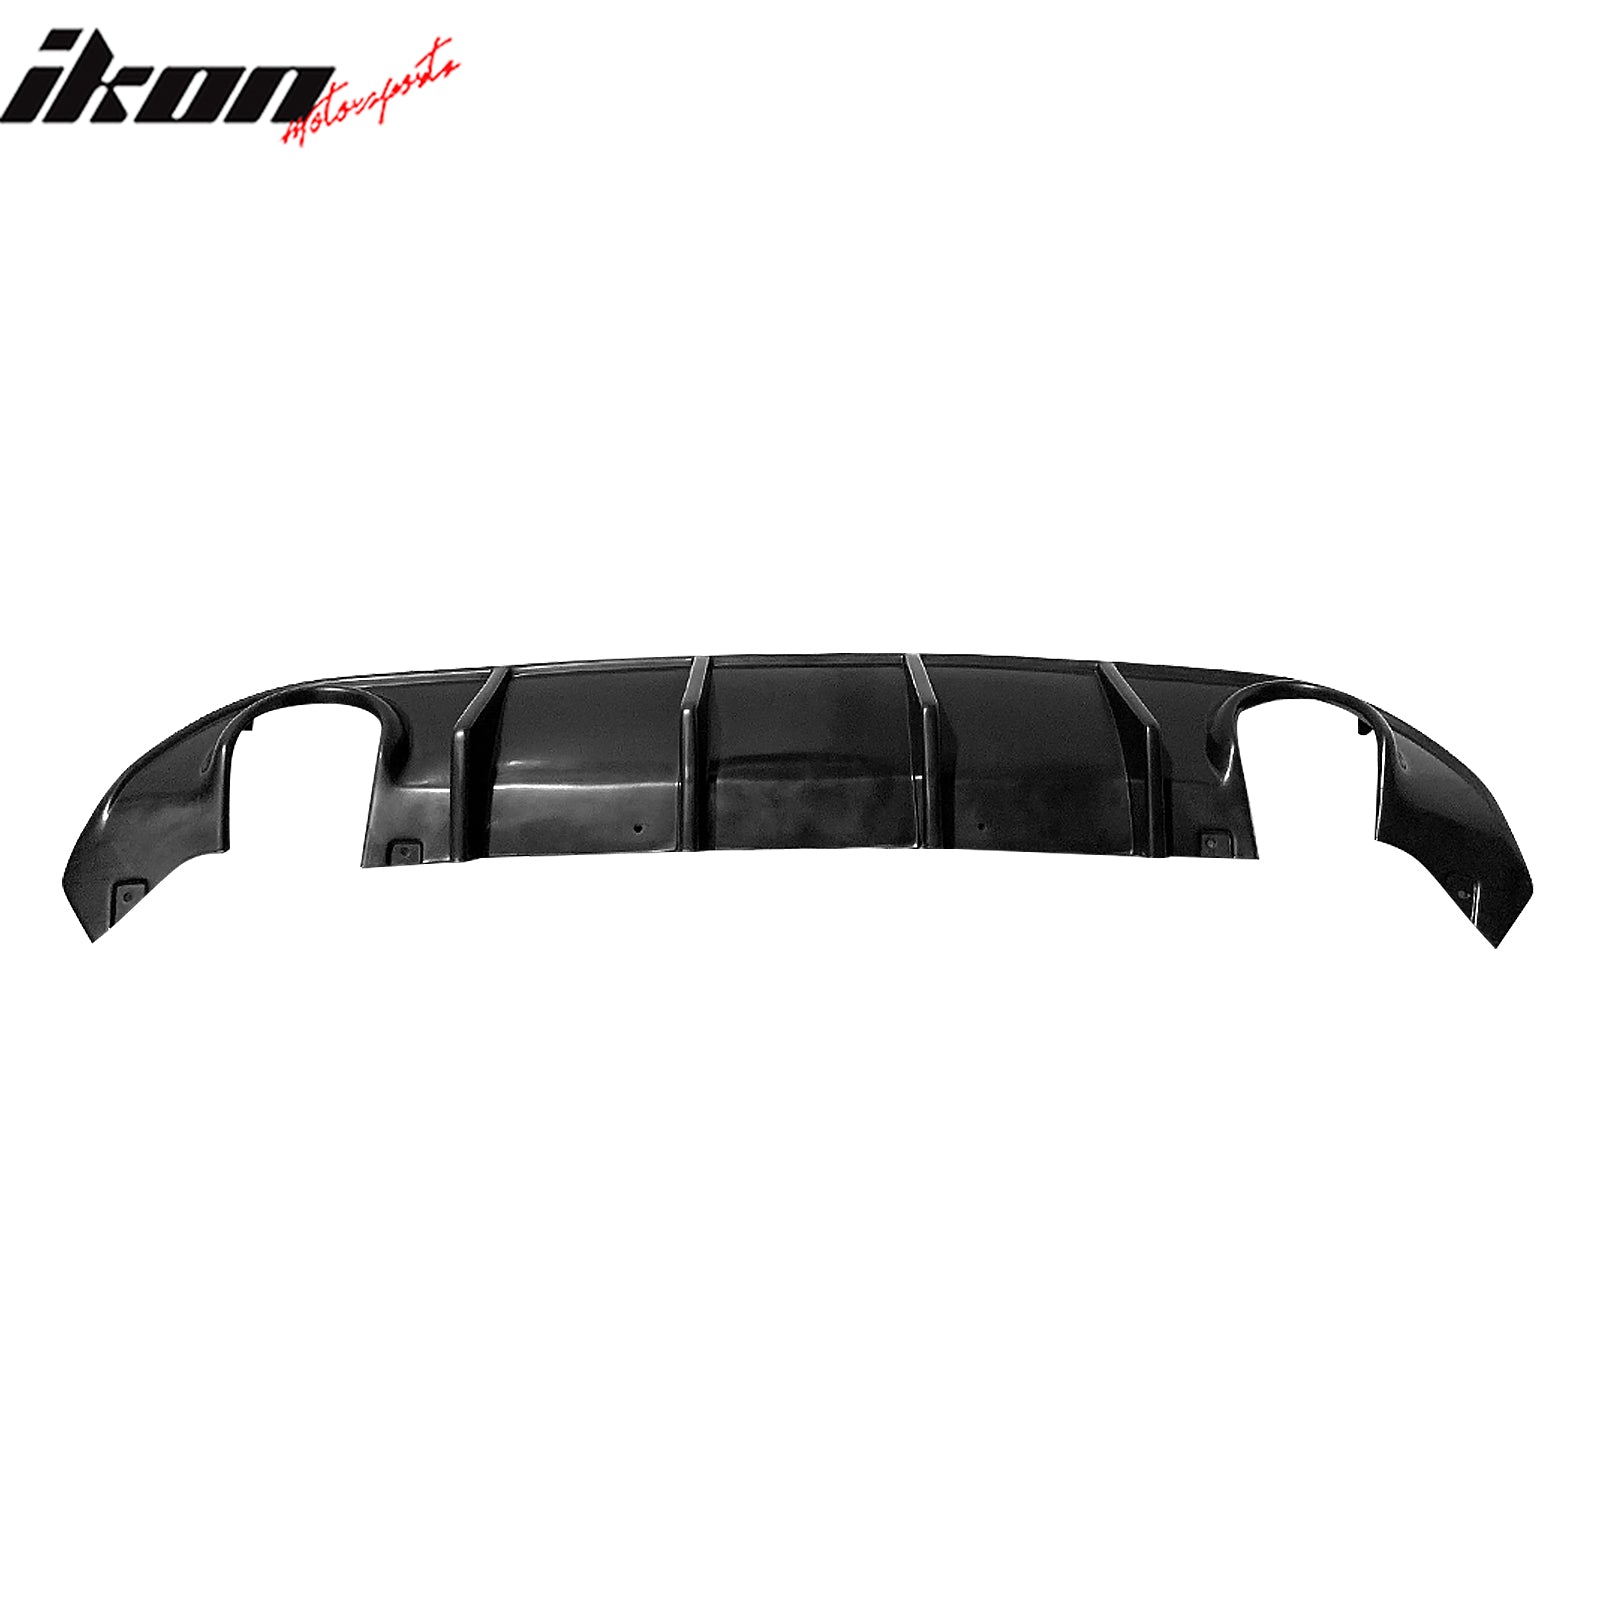 Fits 15-20 Dodge Charger SRT & Scat Pack MDP Style Rear Bumper Lip Diffuser PU